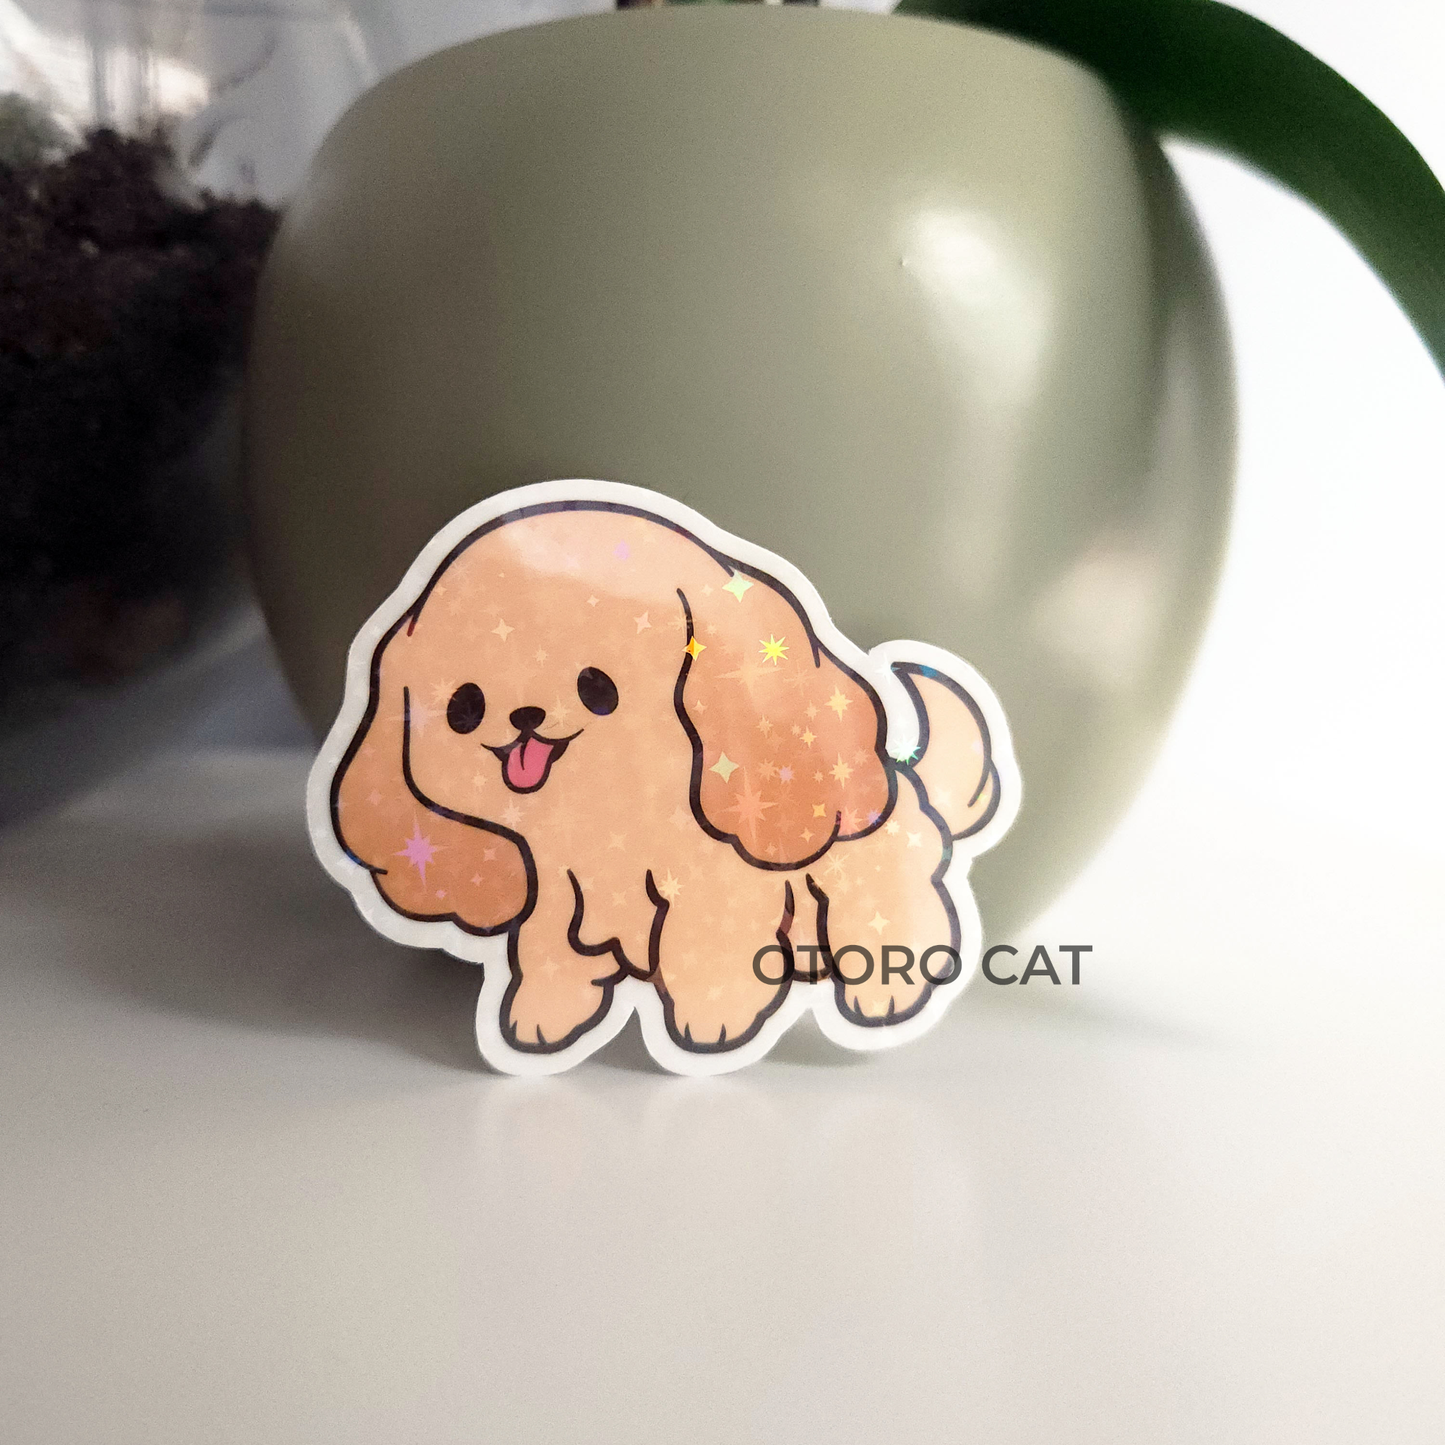 Holographic Star Tan Cockerspaniel Sticker: Sparkling Canine Elegance for Stylish Statements!